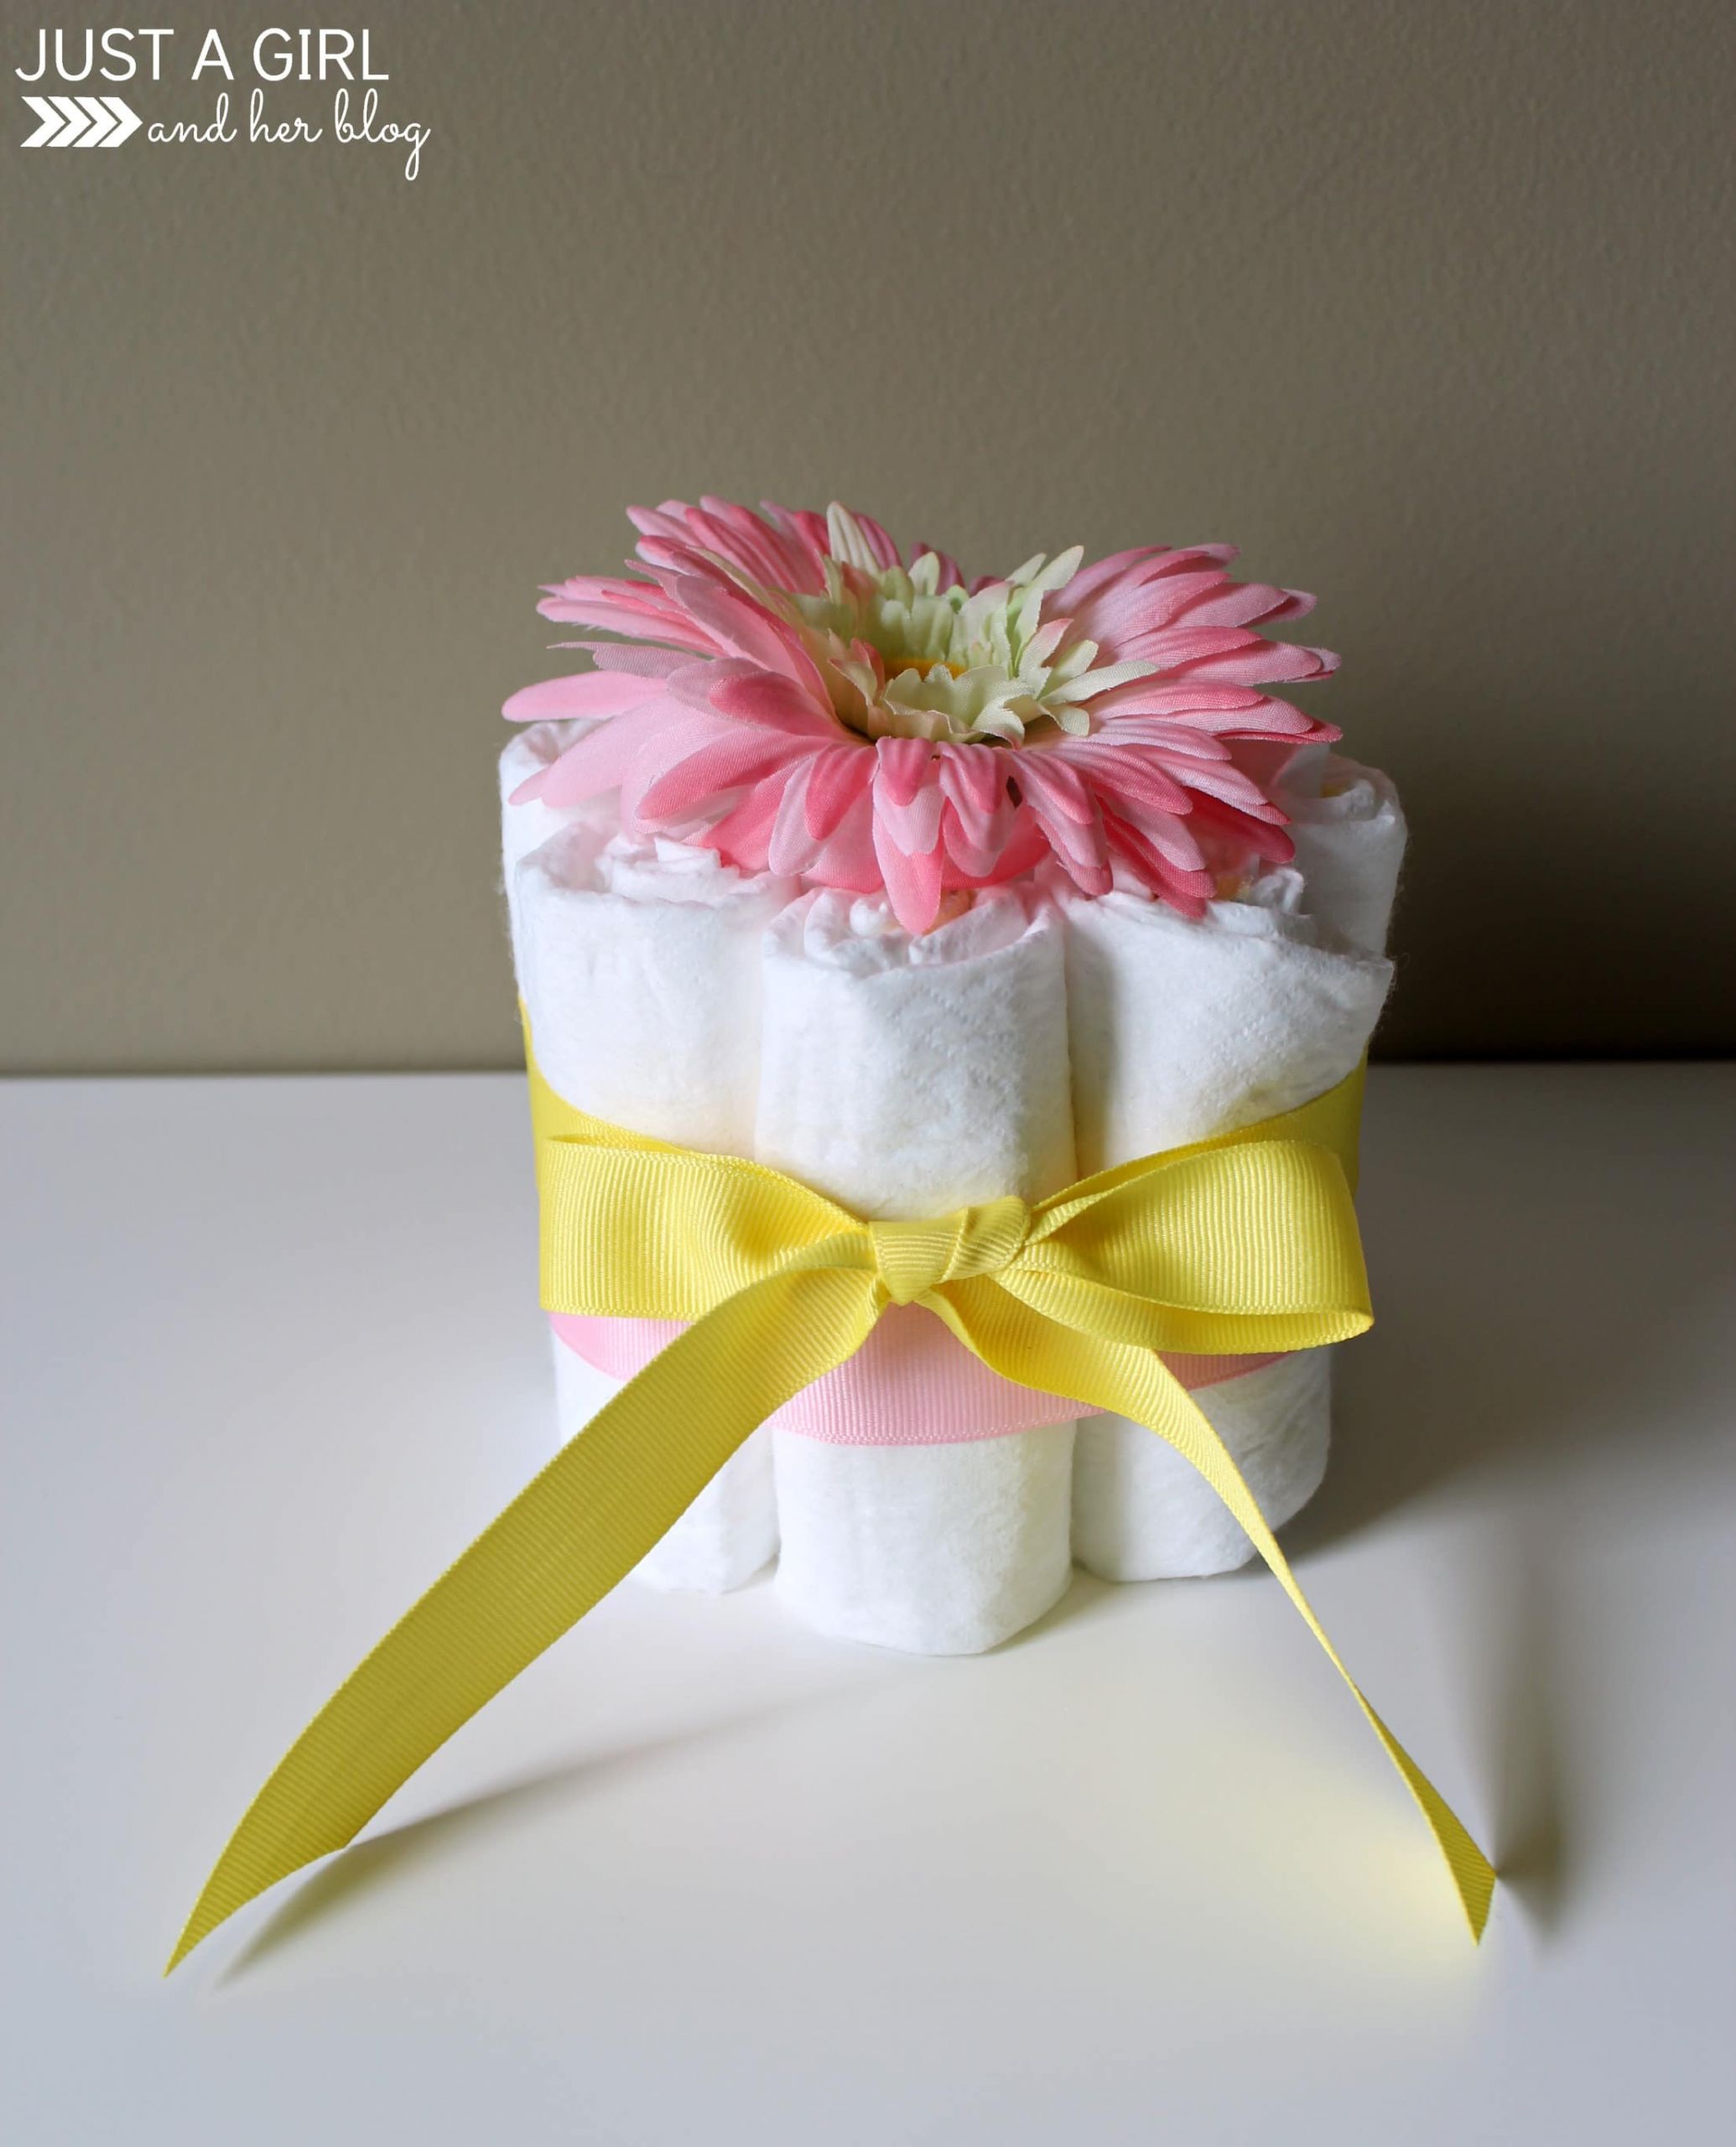 Baby Shower DIY Centerpieces
 Sweet and Simple Baby Shower Centerpieces